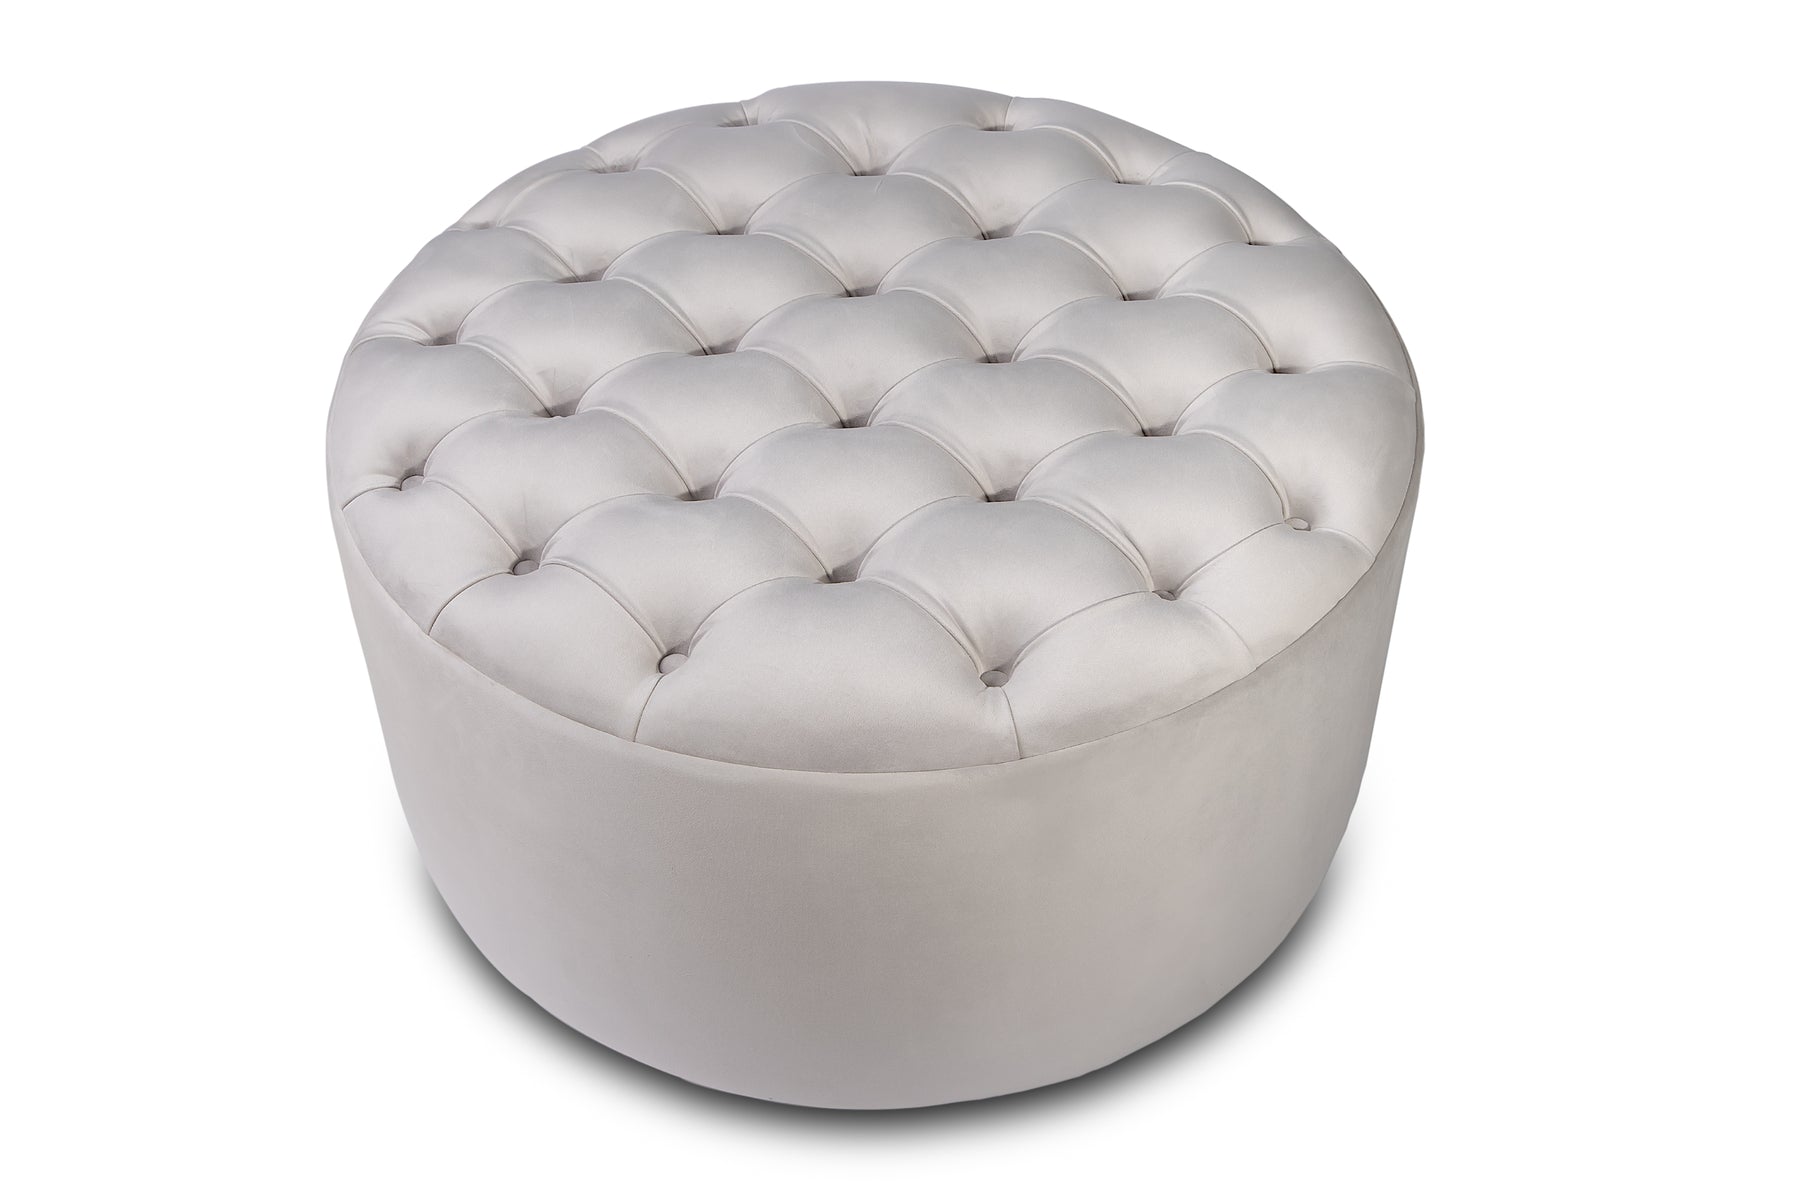 Verve Chesterfield Upholstered Pouffe / Coffee Table